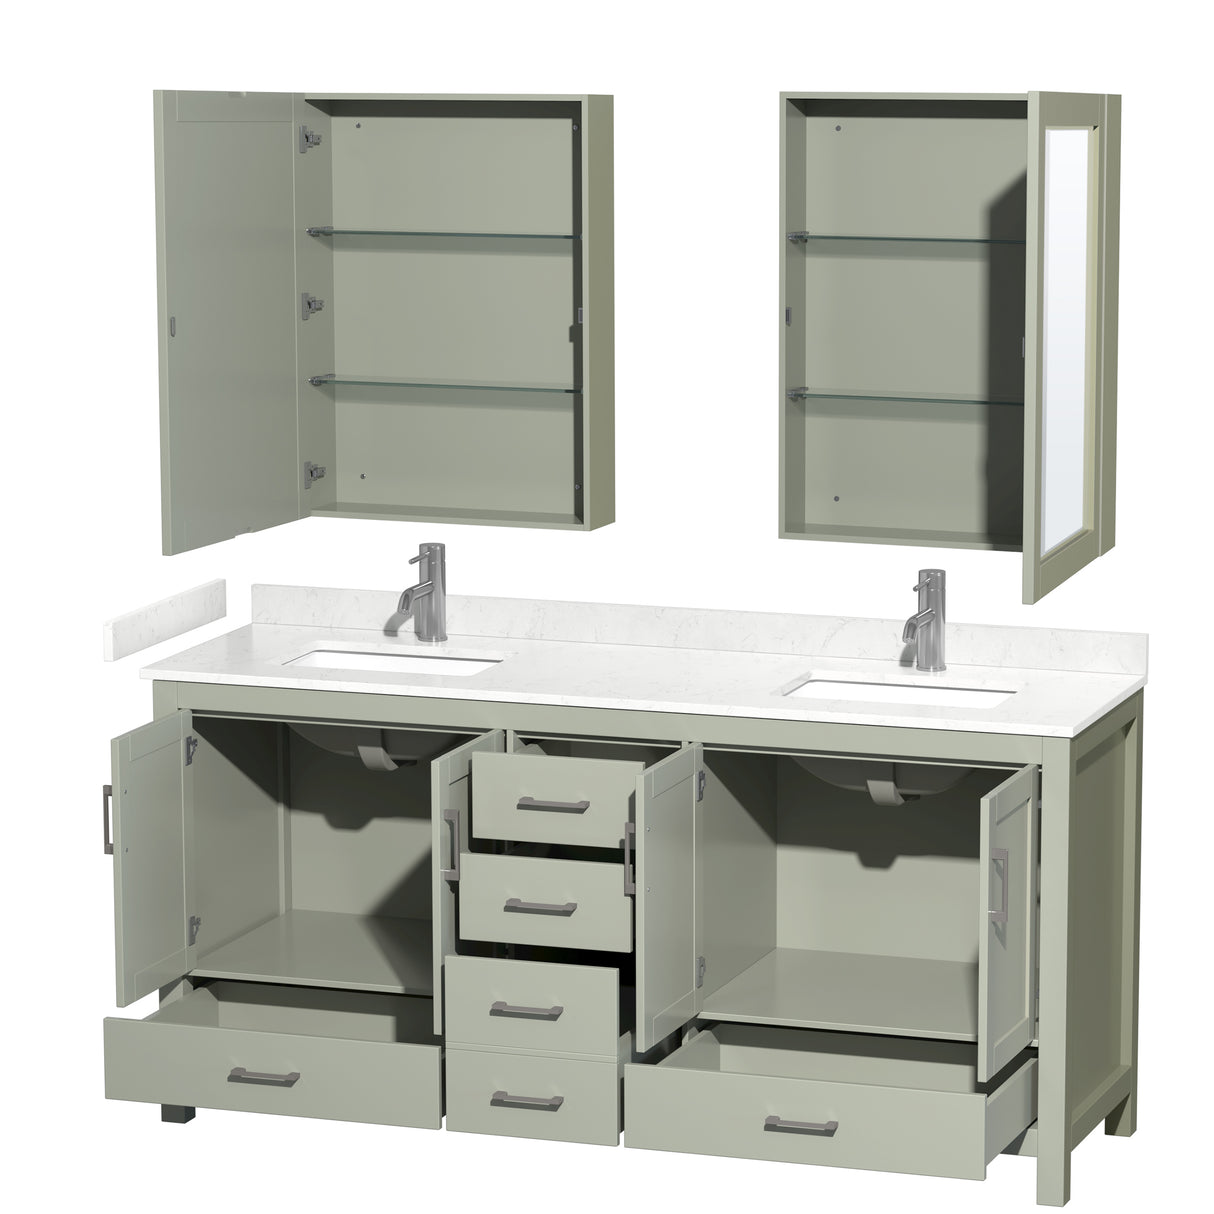 Sheffield 72 inch Double Bathroom Vanity in Light Green Carrara Cultured Marble Countertop Undermount Square Sinks Brushed Nickel Trim Medicine Cabinets